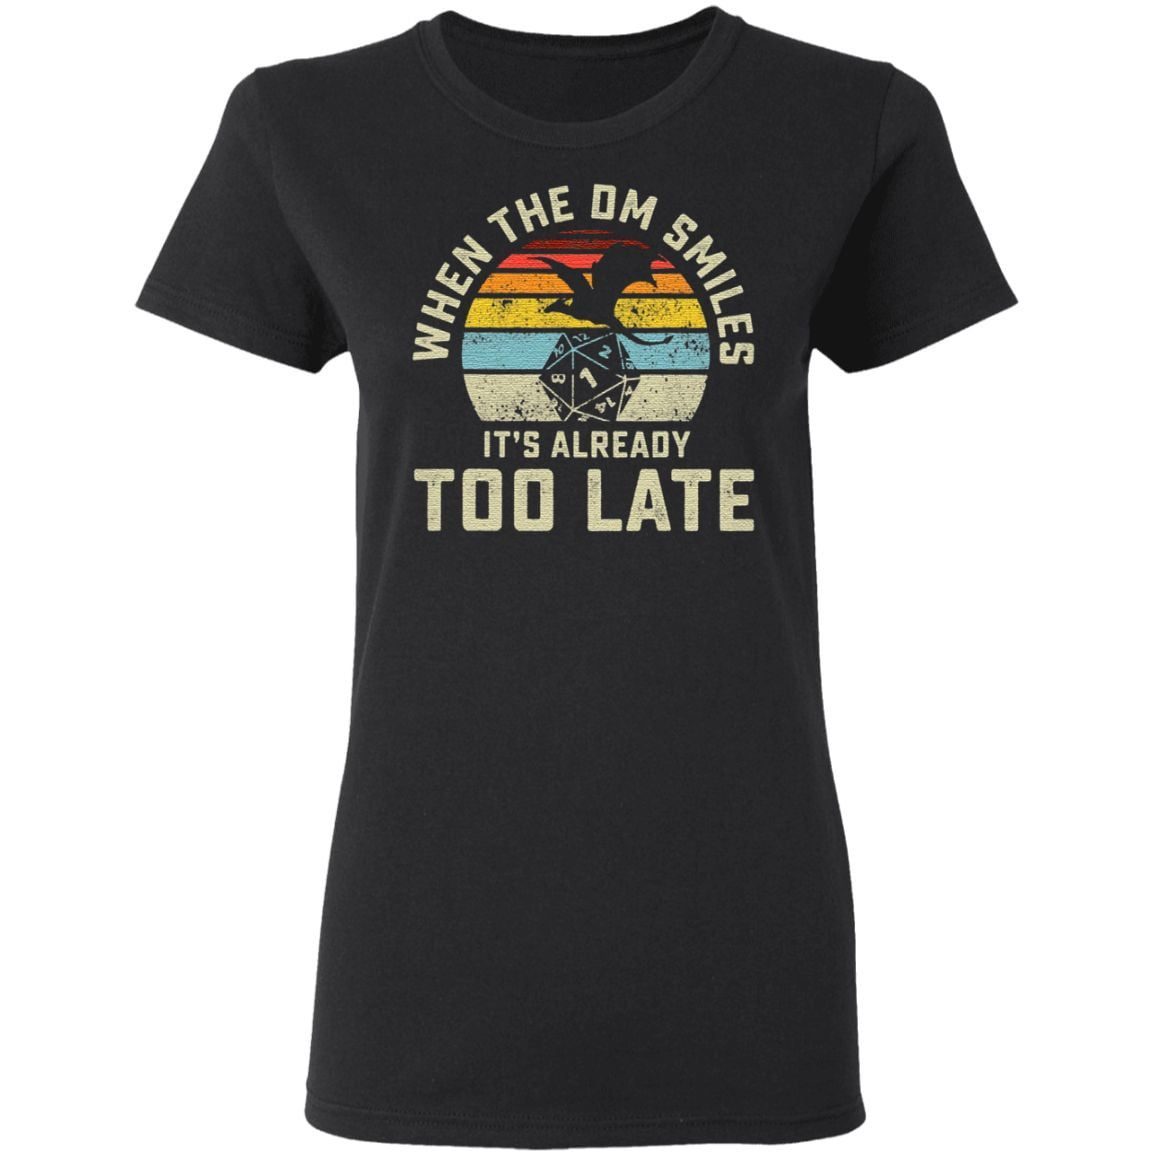 When The DM Smiles It’s Already Too Late TShirt